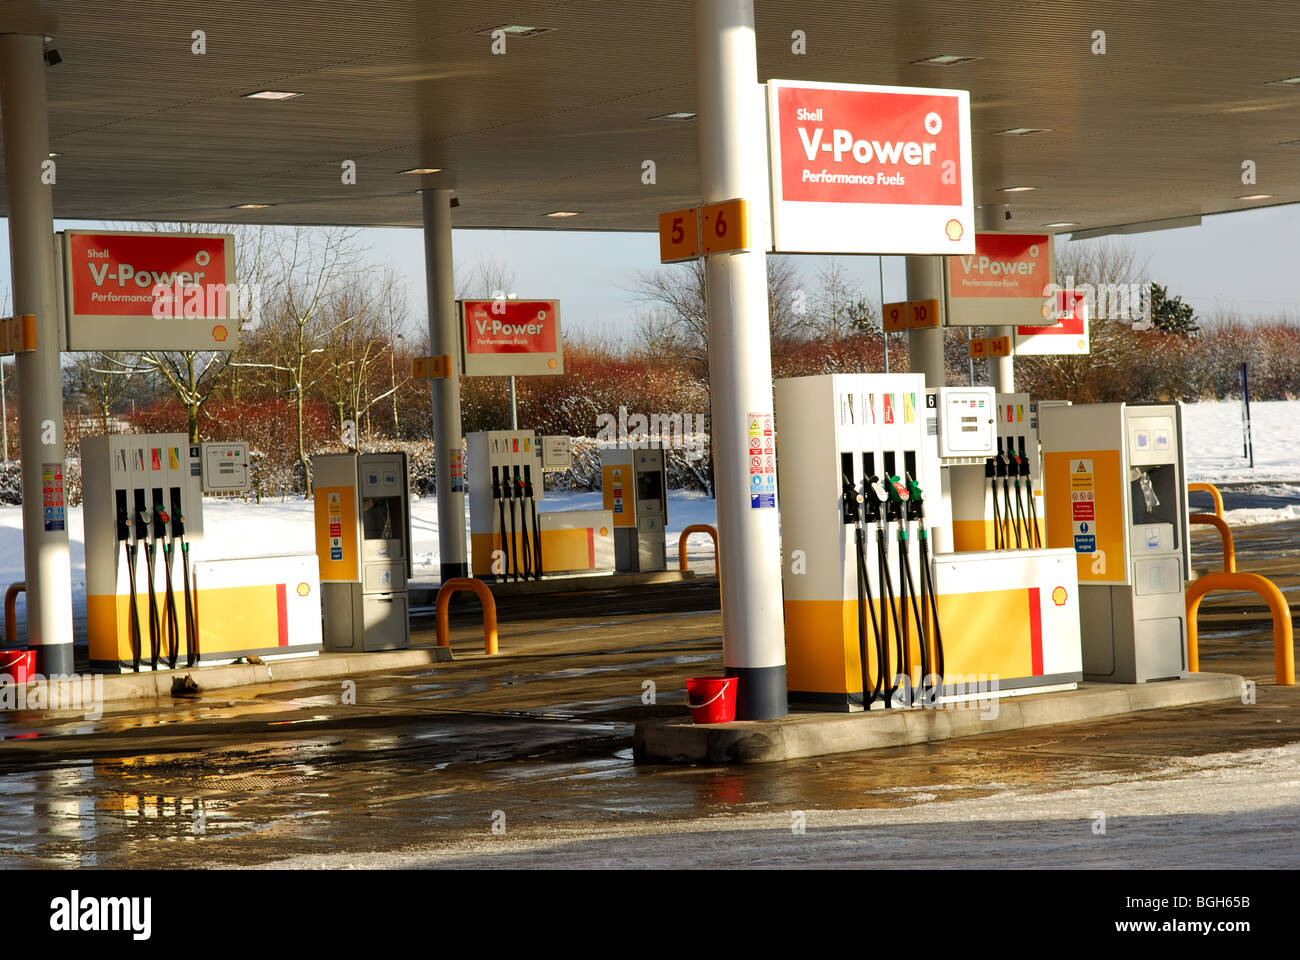 Shell Petrol Station Motorway Services. Stock Photo